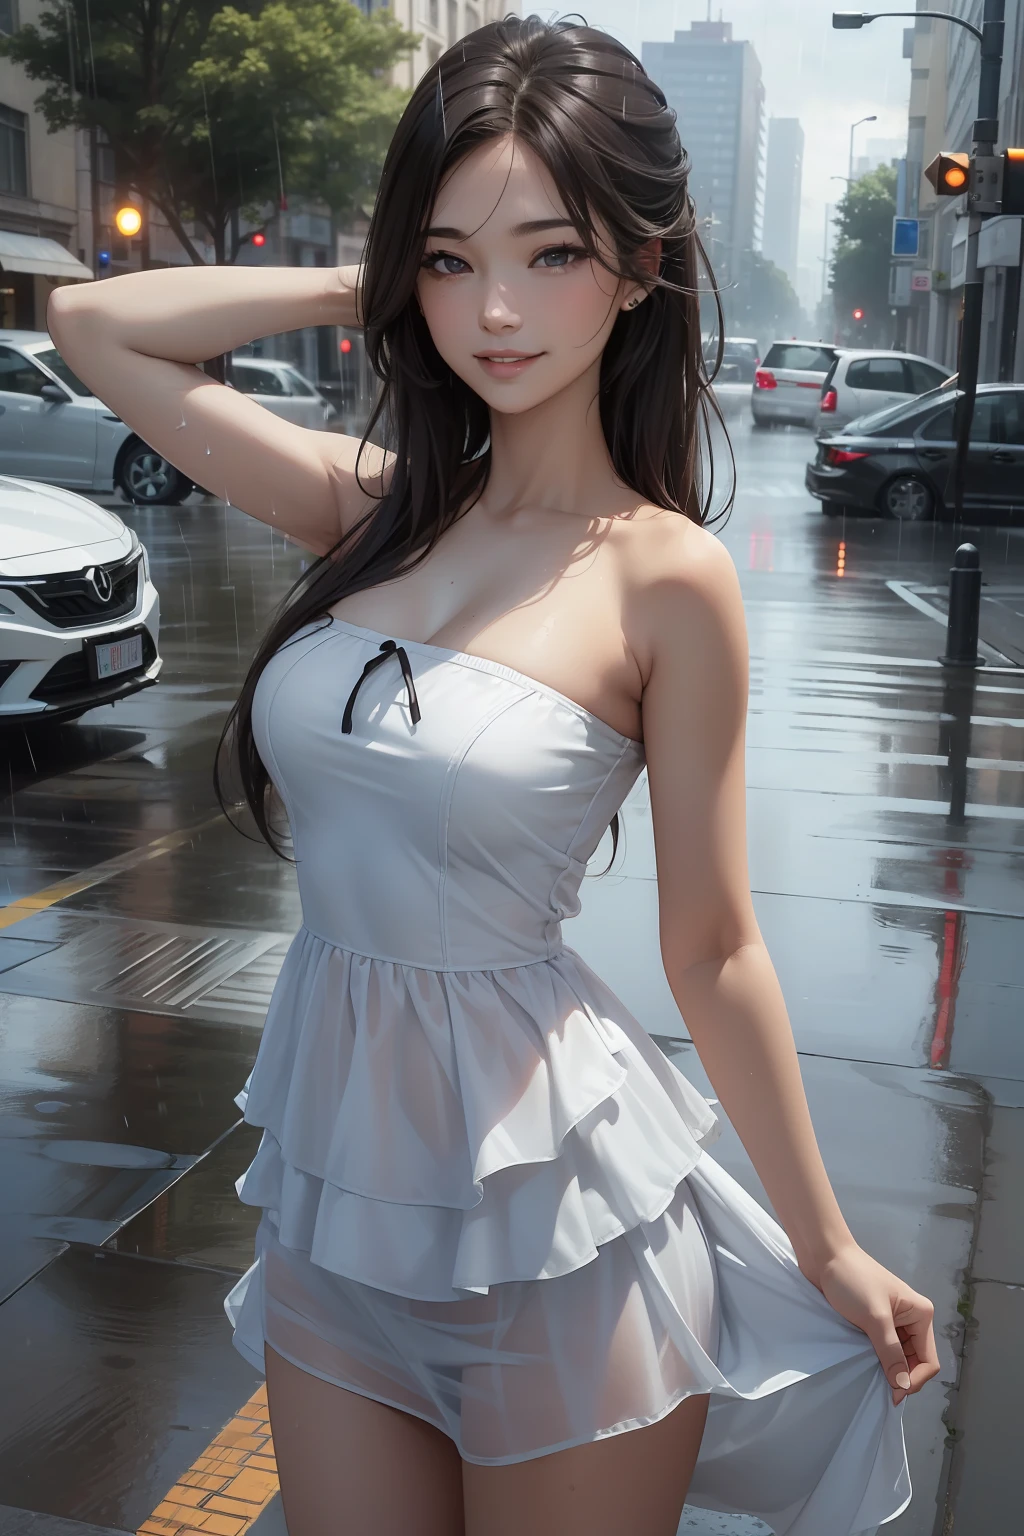 ((Best Quality, 8K, Masterpiece:1.3)), Focus: 1.2, Perfect Body Beauty: 1.4, Buttocks: 1.2, ((Layered Haircut, Breasts: 1.2)), (Wet Clothes: 1.1), (Rain, Street:1.3), Bandeau Dress: 1.1, Highly Detailed Face and Skin Texture, Fine Eyes, Double Eyelids, Whitening Skin, Long Hair, (Shut Up: 1.3), Smile